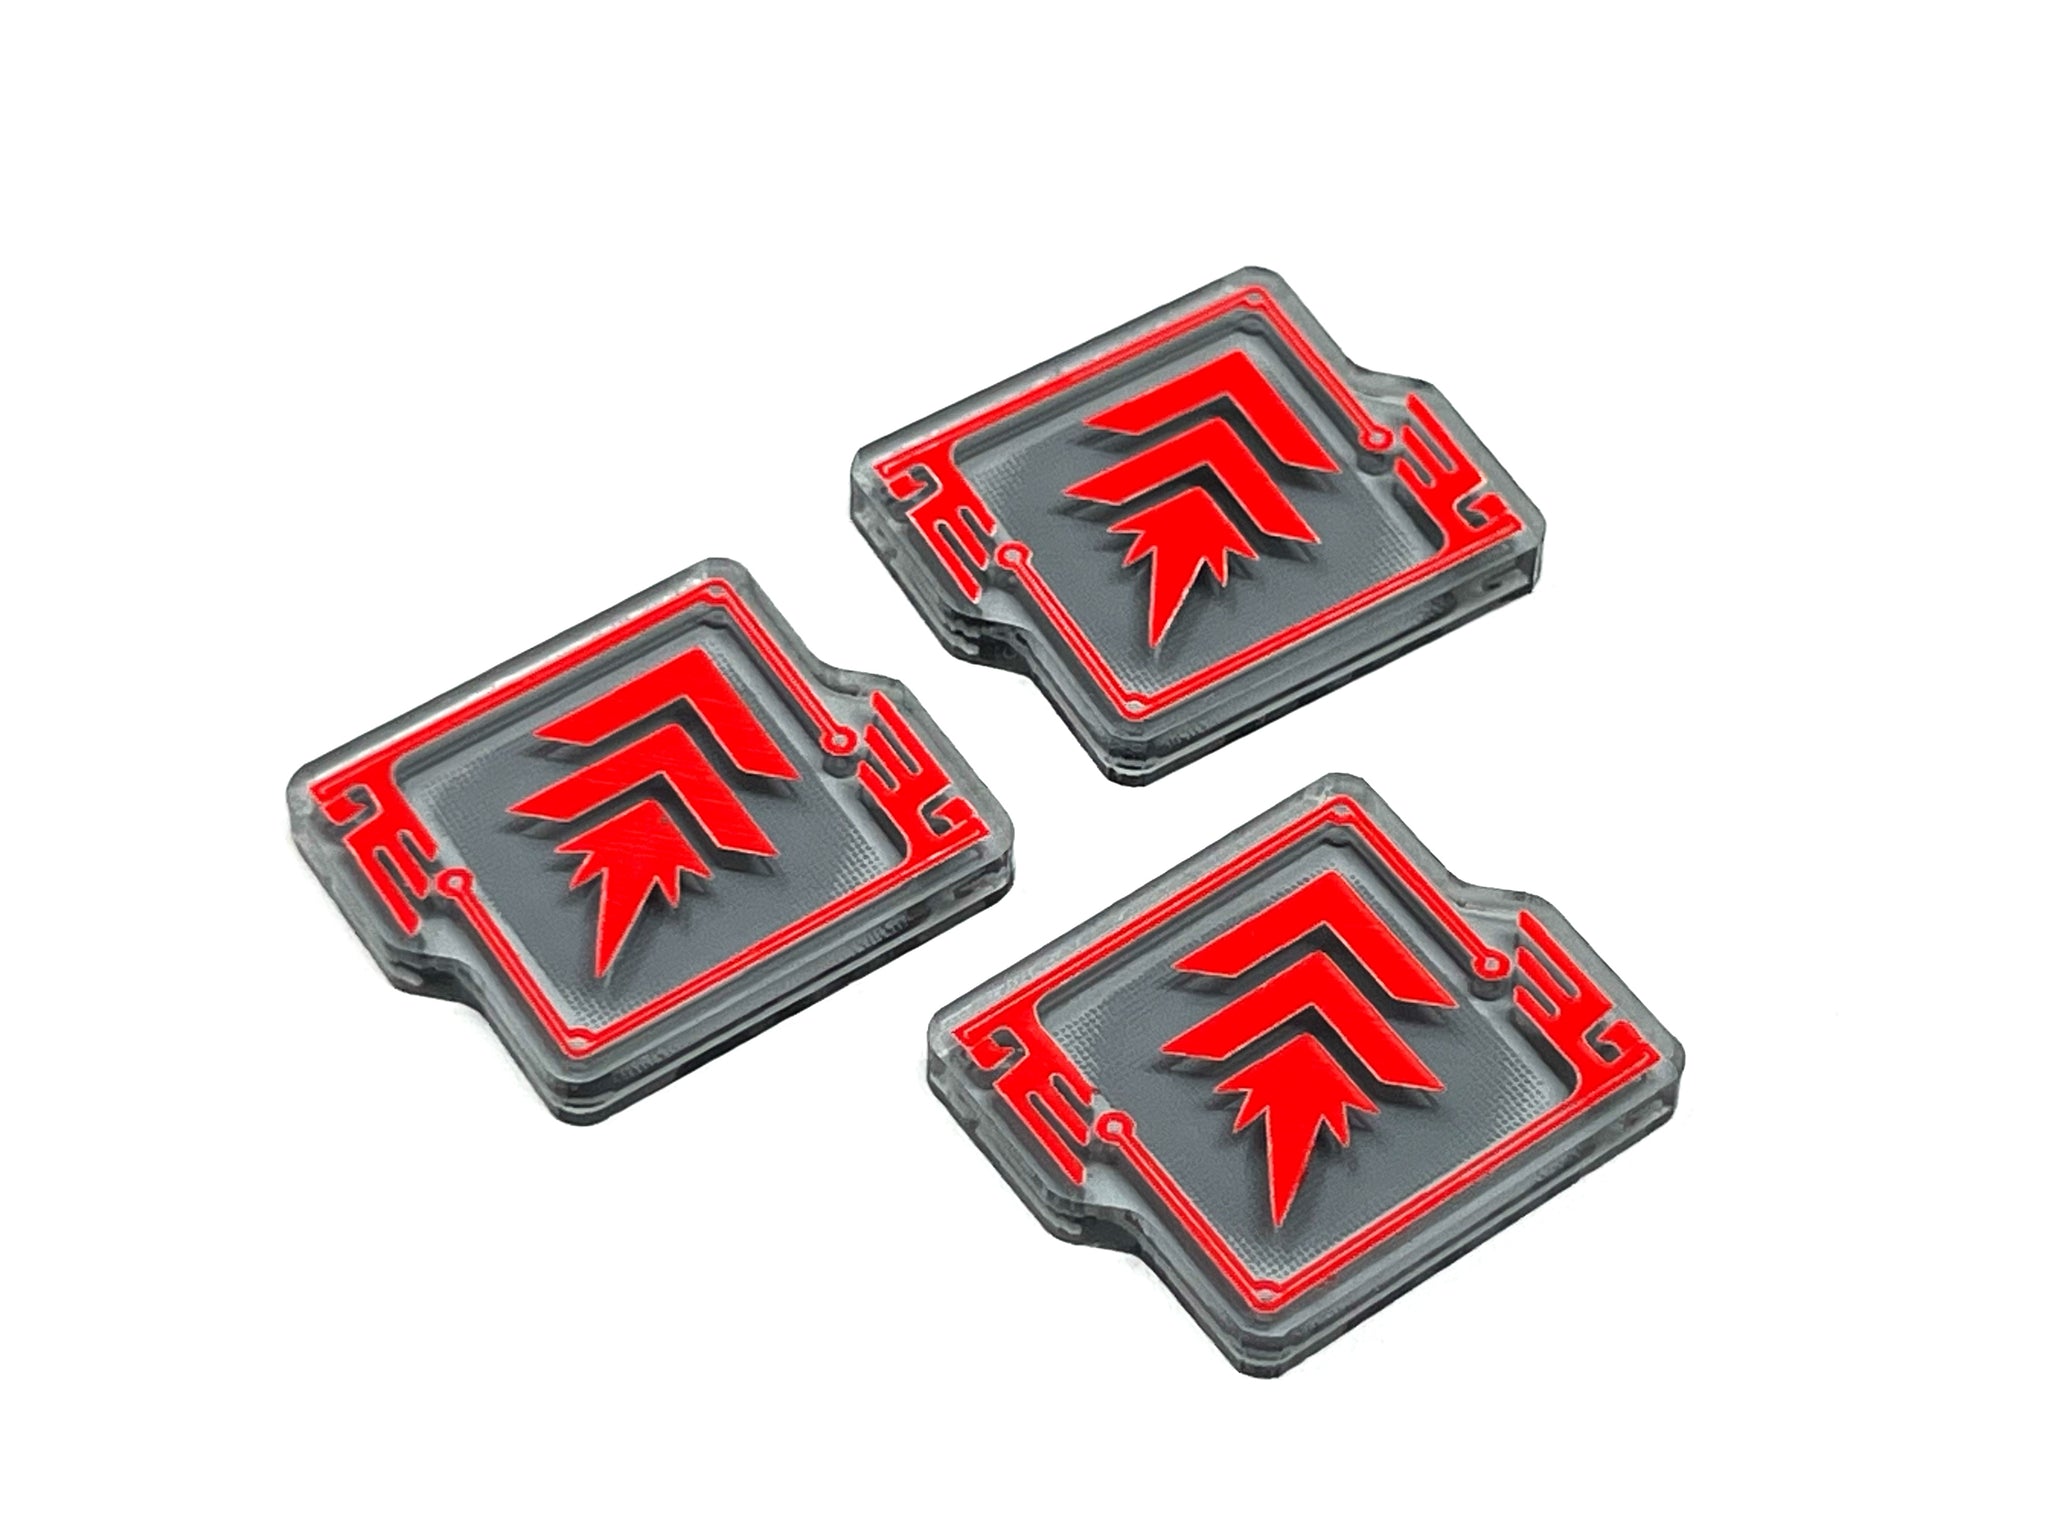 Charge - Phase ability Token Set for Warhammer 40k 10th Edition